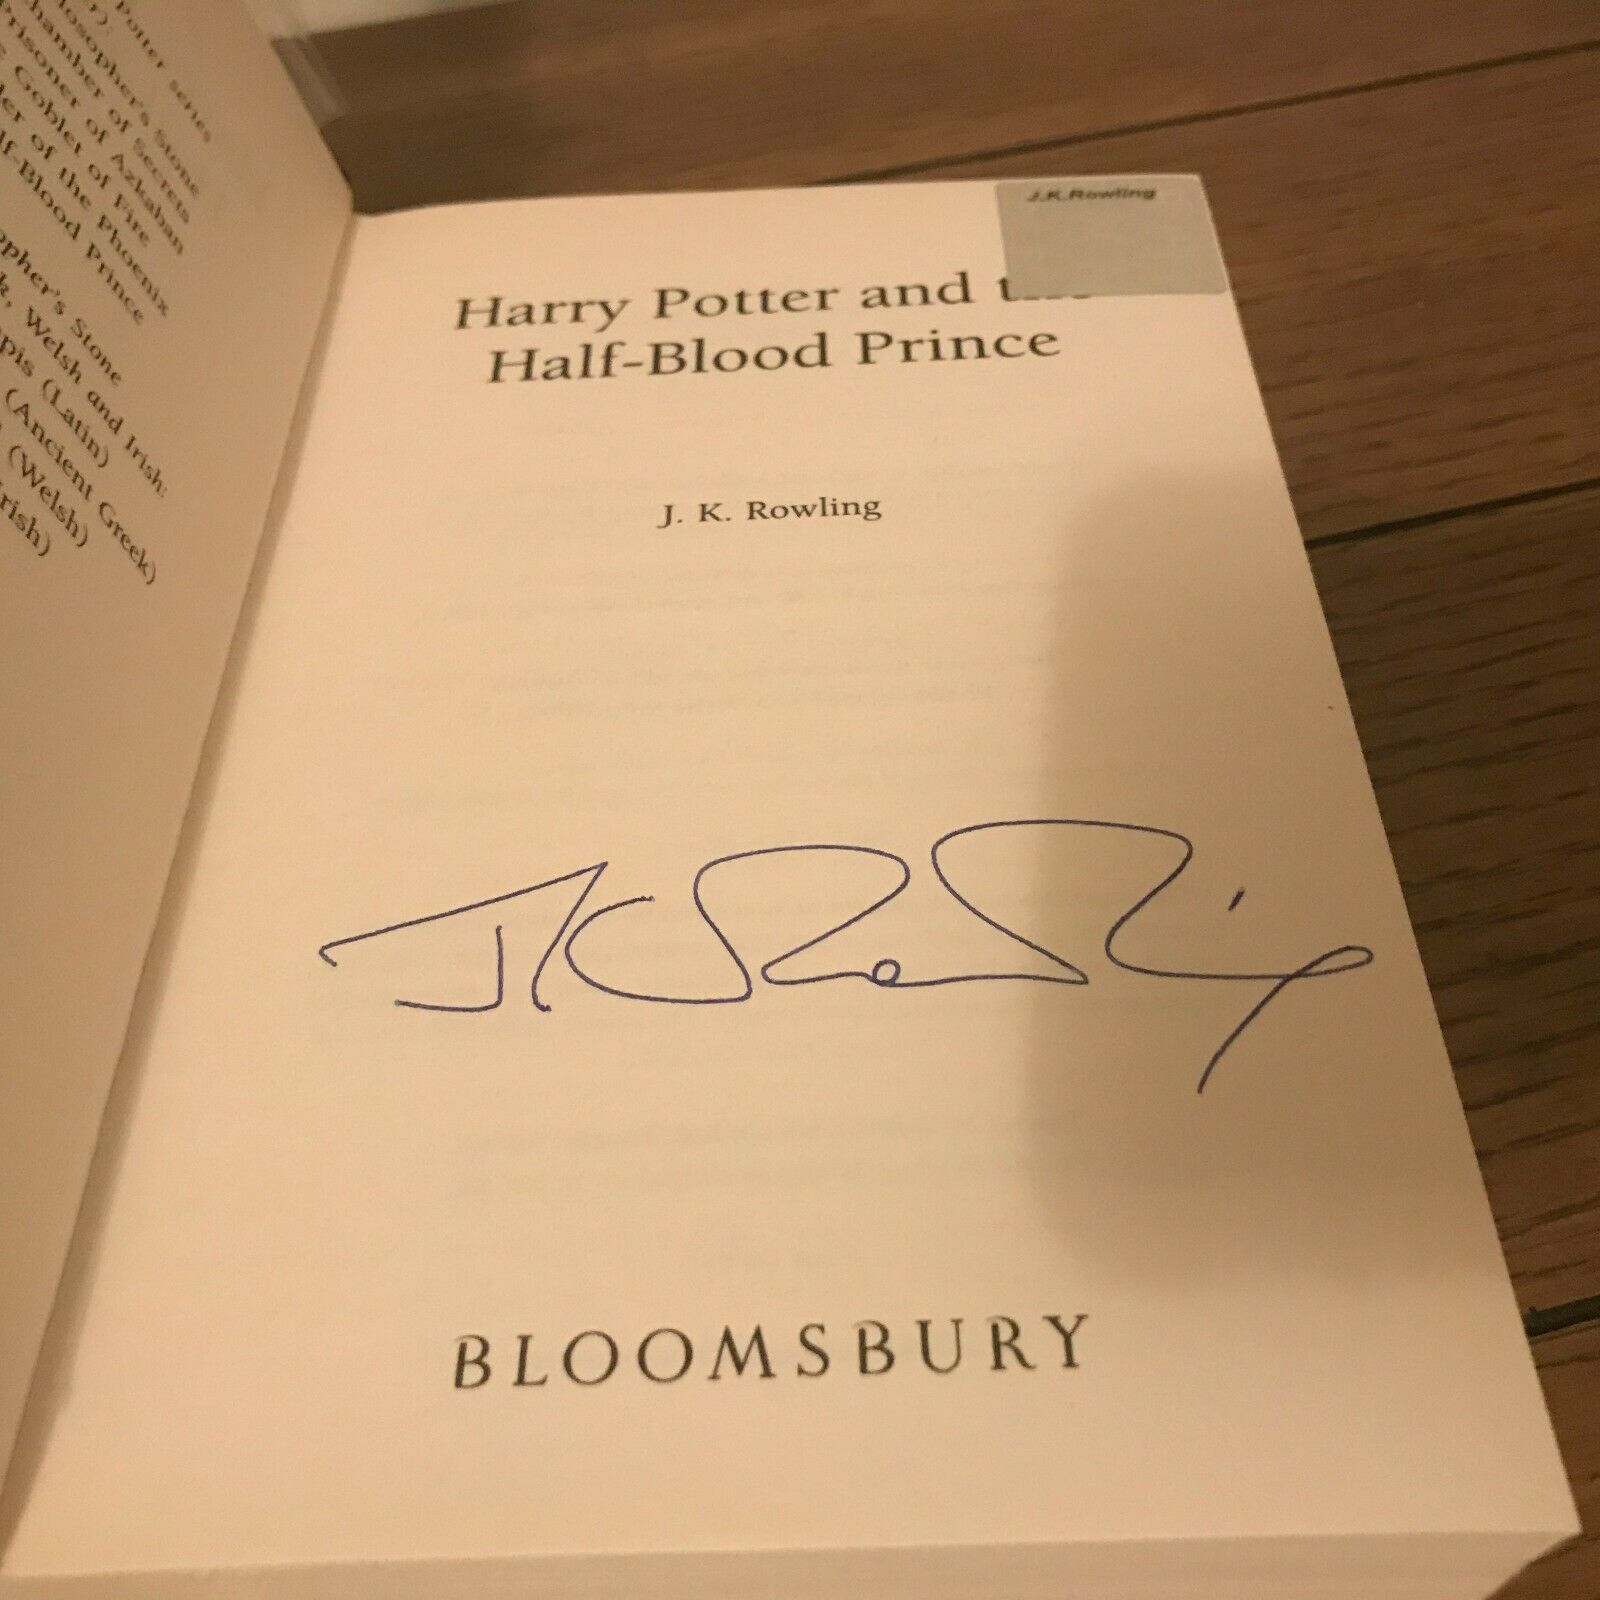 J.K. Rowling Forgery with a REAL Rowling Hologram! Found inside a Harry Potter and the Half-Blood Prince (published by Bloomsbury UK) on eBay